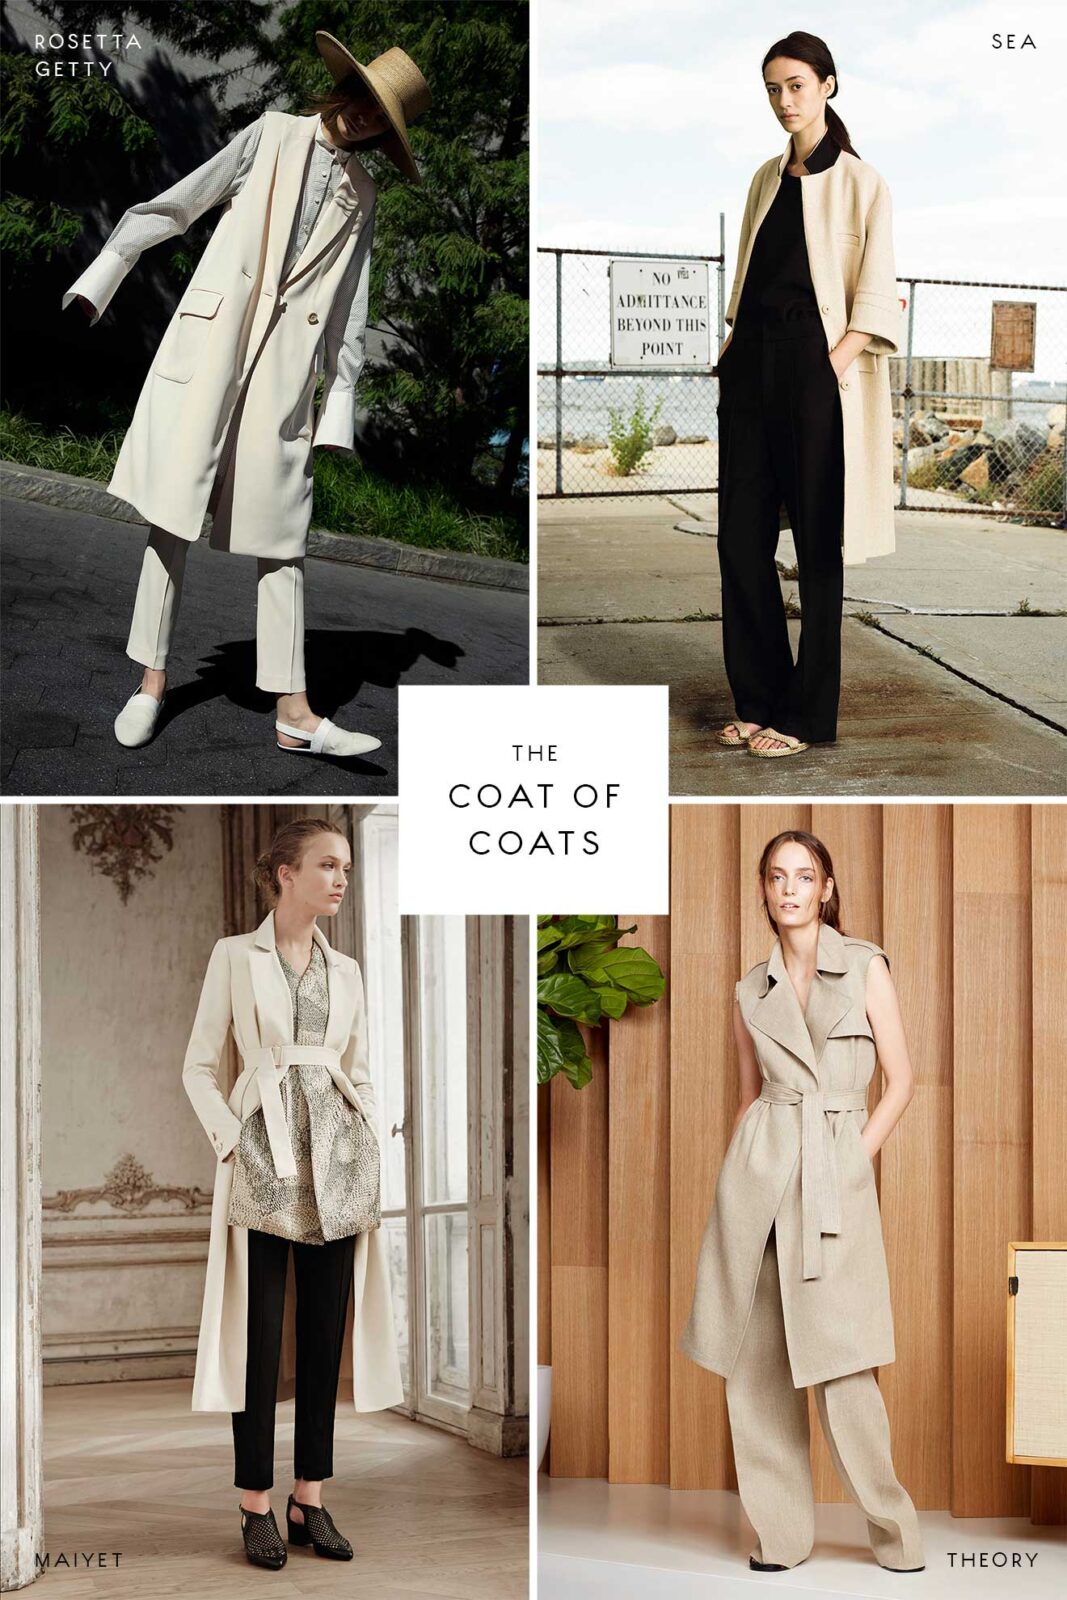 SS15 favourites by Miss Moss